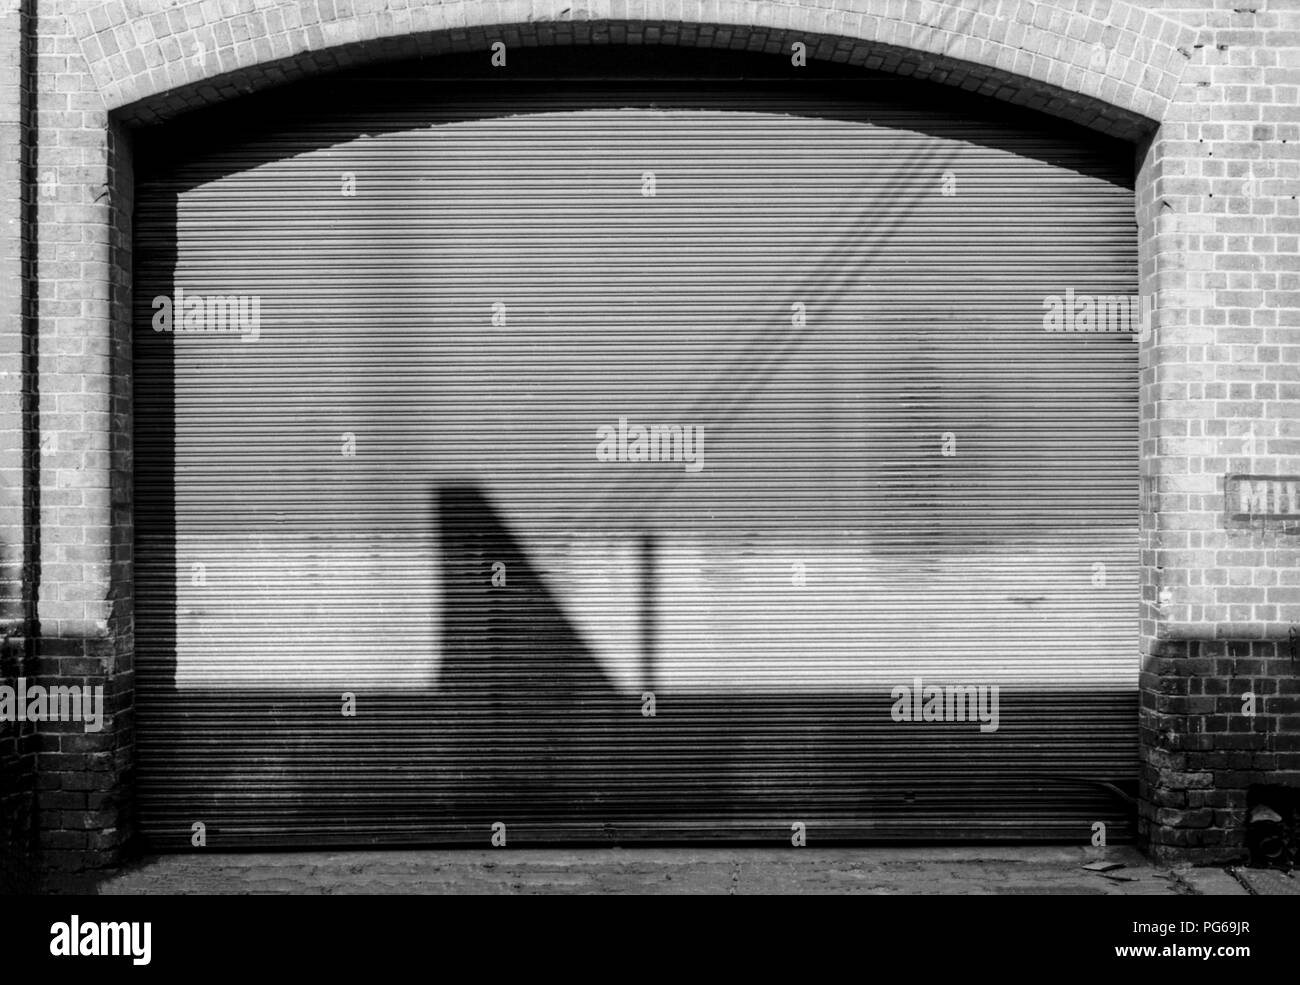 A cast of shadows: Reflected shapes on a garage door. Stock Photo